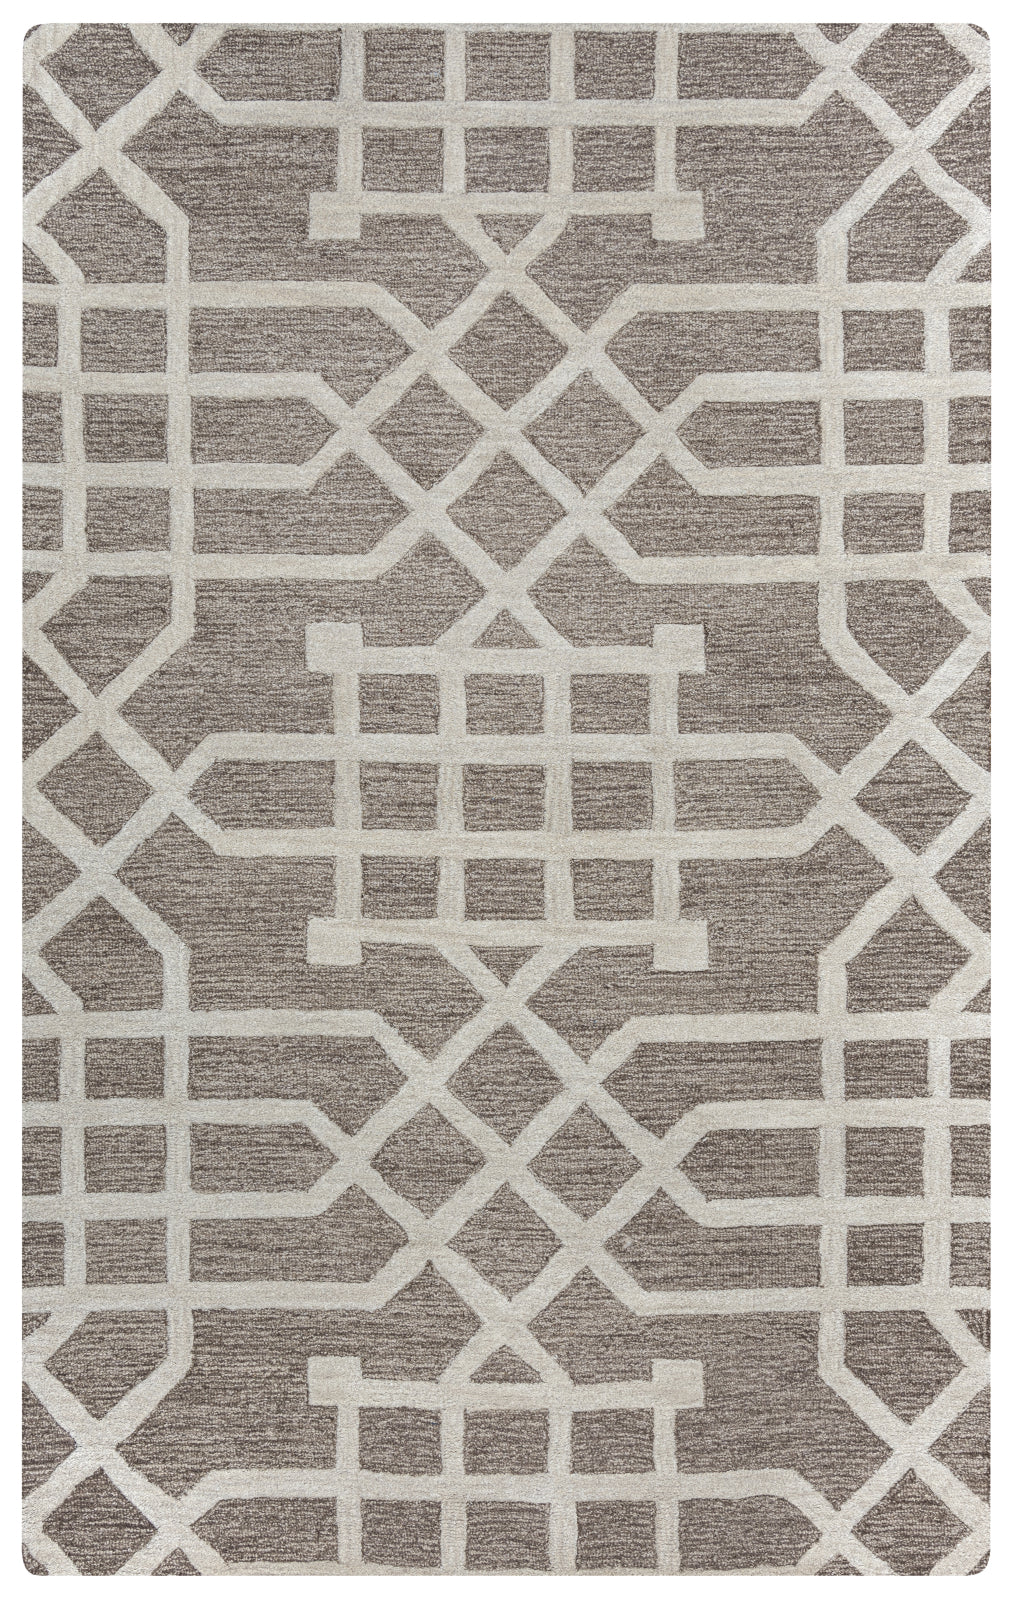 Rizzy Caterine CE9473 Taupe/Tan Area Rug main image